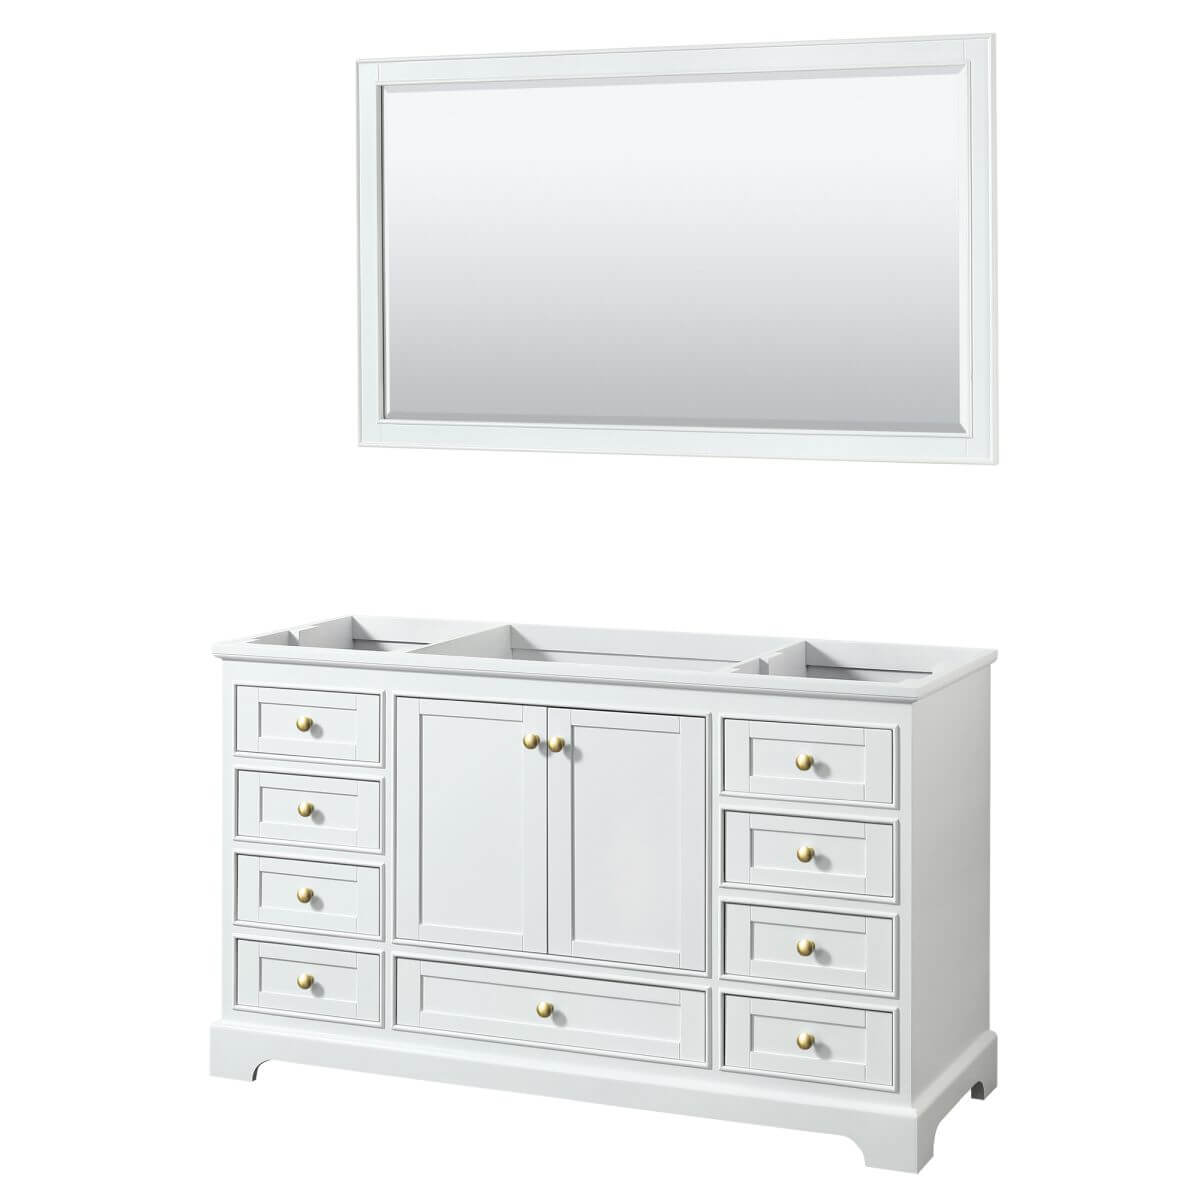 Wyndham Collection Deborah 60 inch Single Bathroom Vanity in White with 58 inch Mirror, Brushed Gold Trim, No Countertop and No Sink - WCS202060SWGCXSXXM58